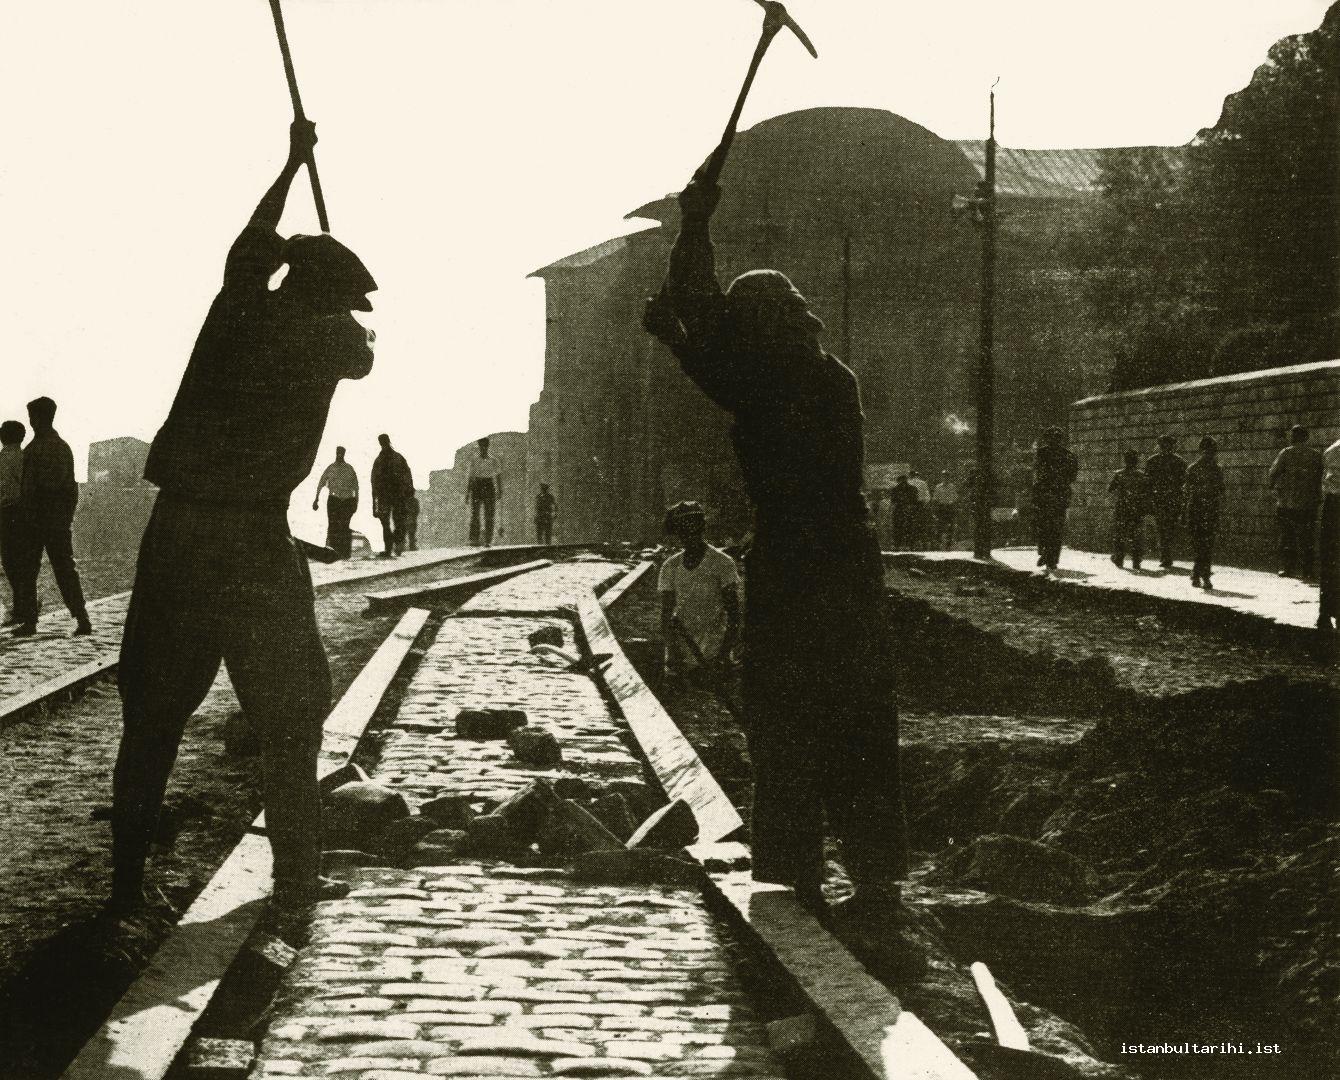 11- Digging works during Beyazıt Square development efforts. By dismantling the tramway Ordu Avenue was prepared to be asphalted.    